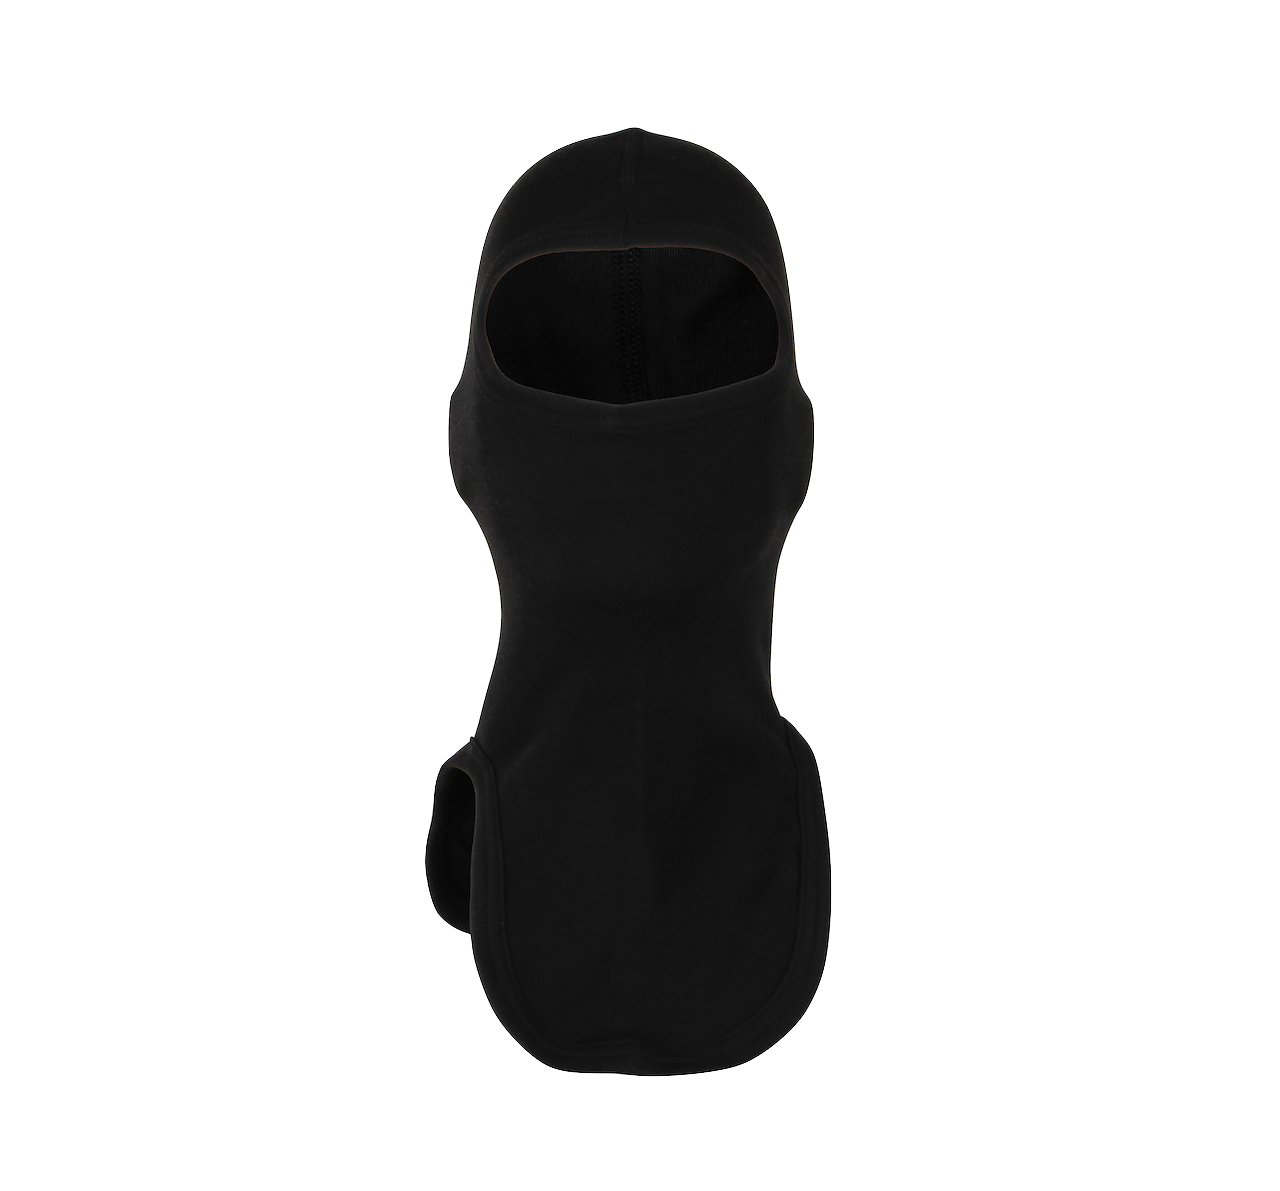 Balaclava Standard III double layer constructed with Nomex® Comfort